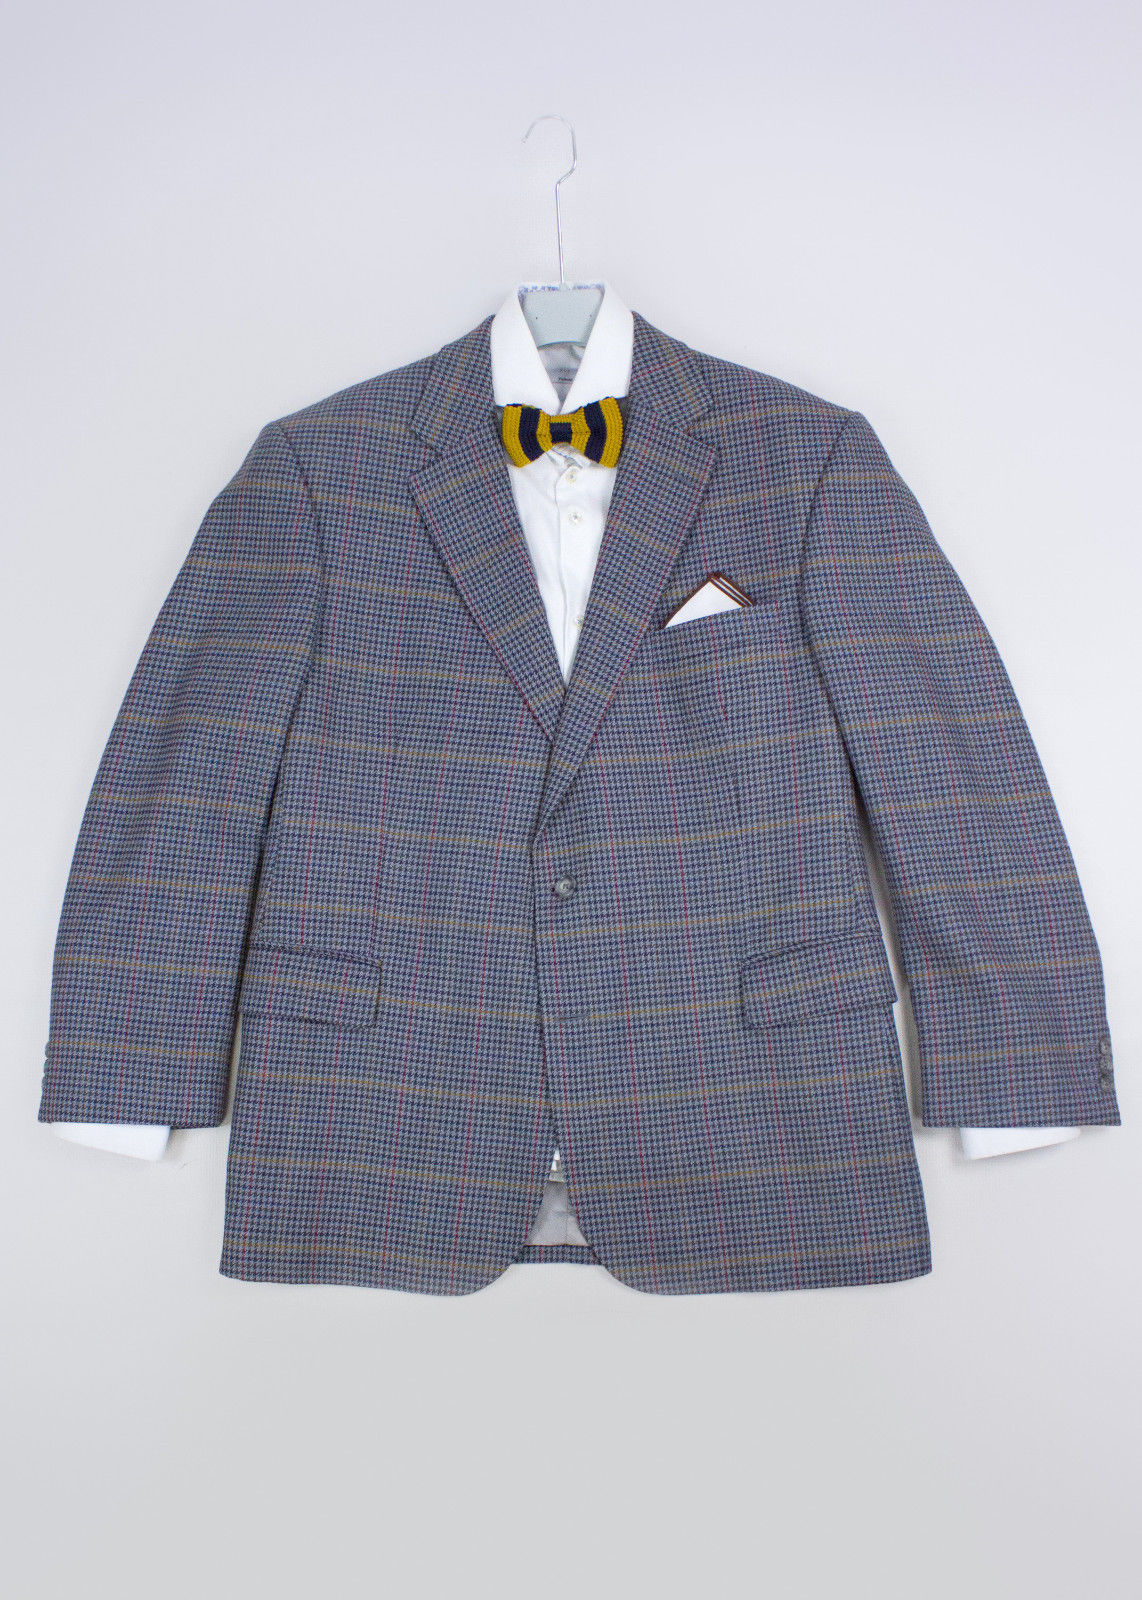 MAGEE Wool Houndstooth Plaid Blazer, US 48 R, EU 58 R - secondfirst